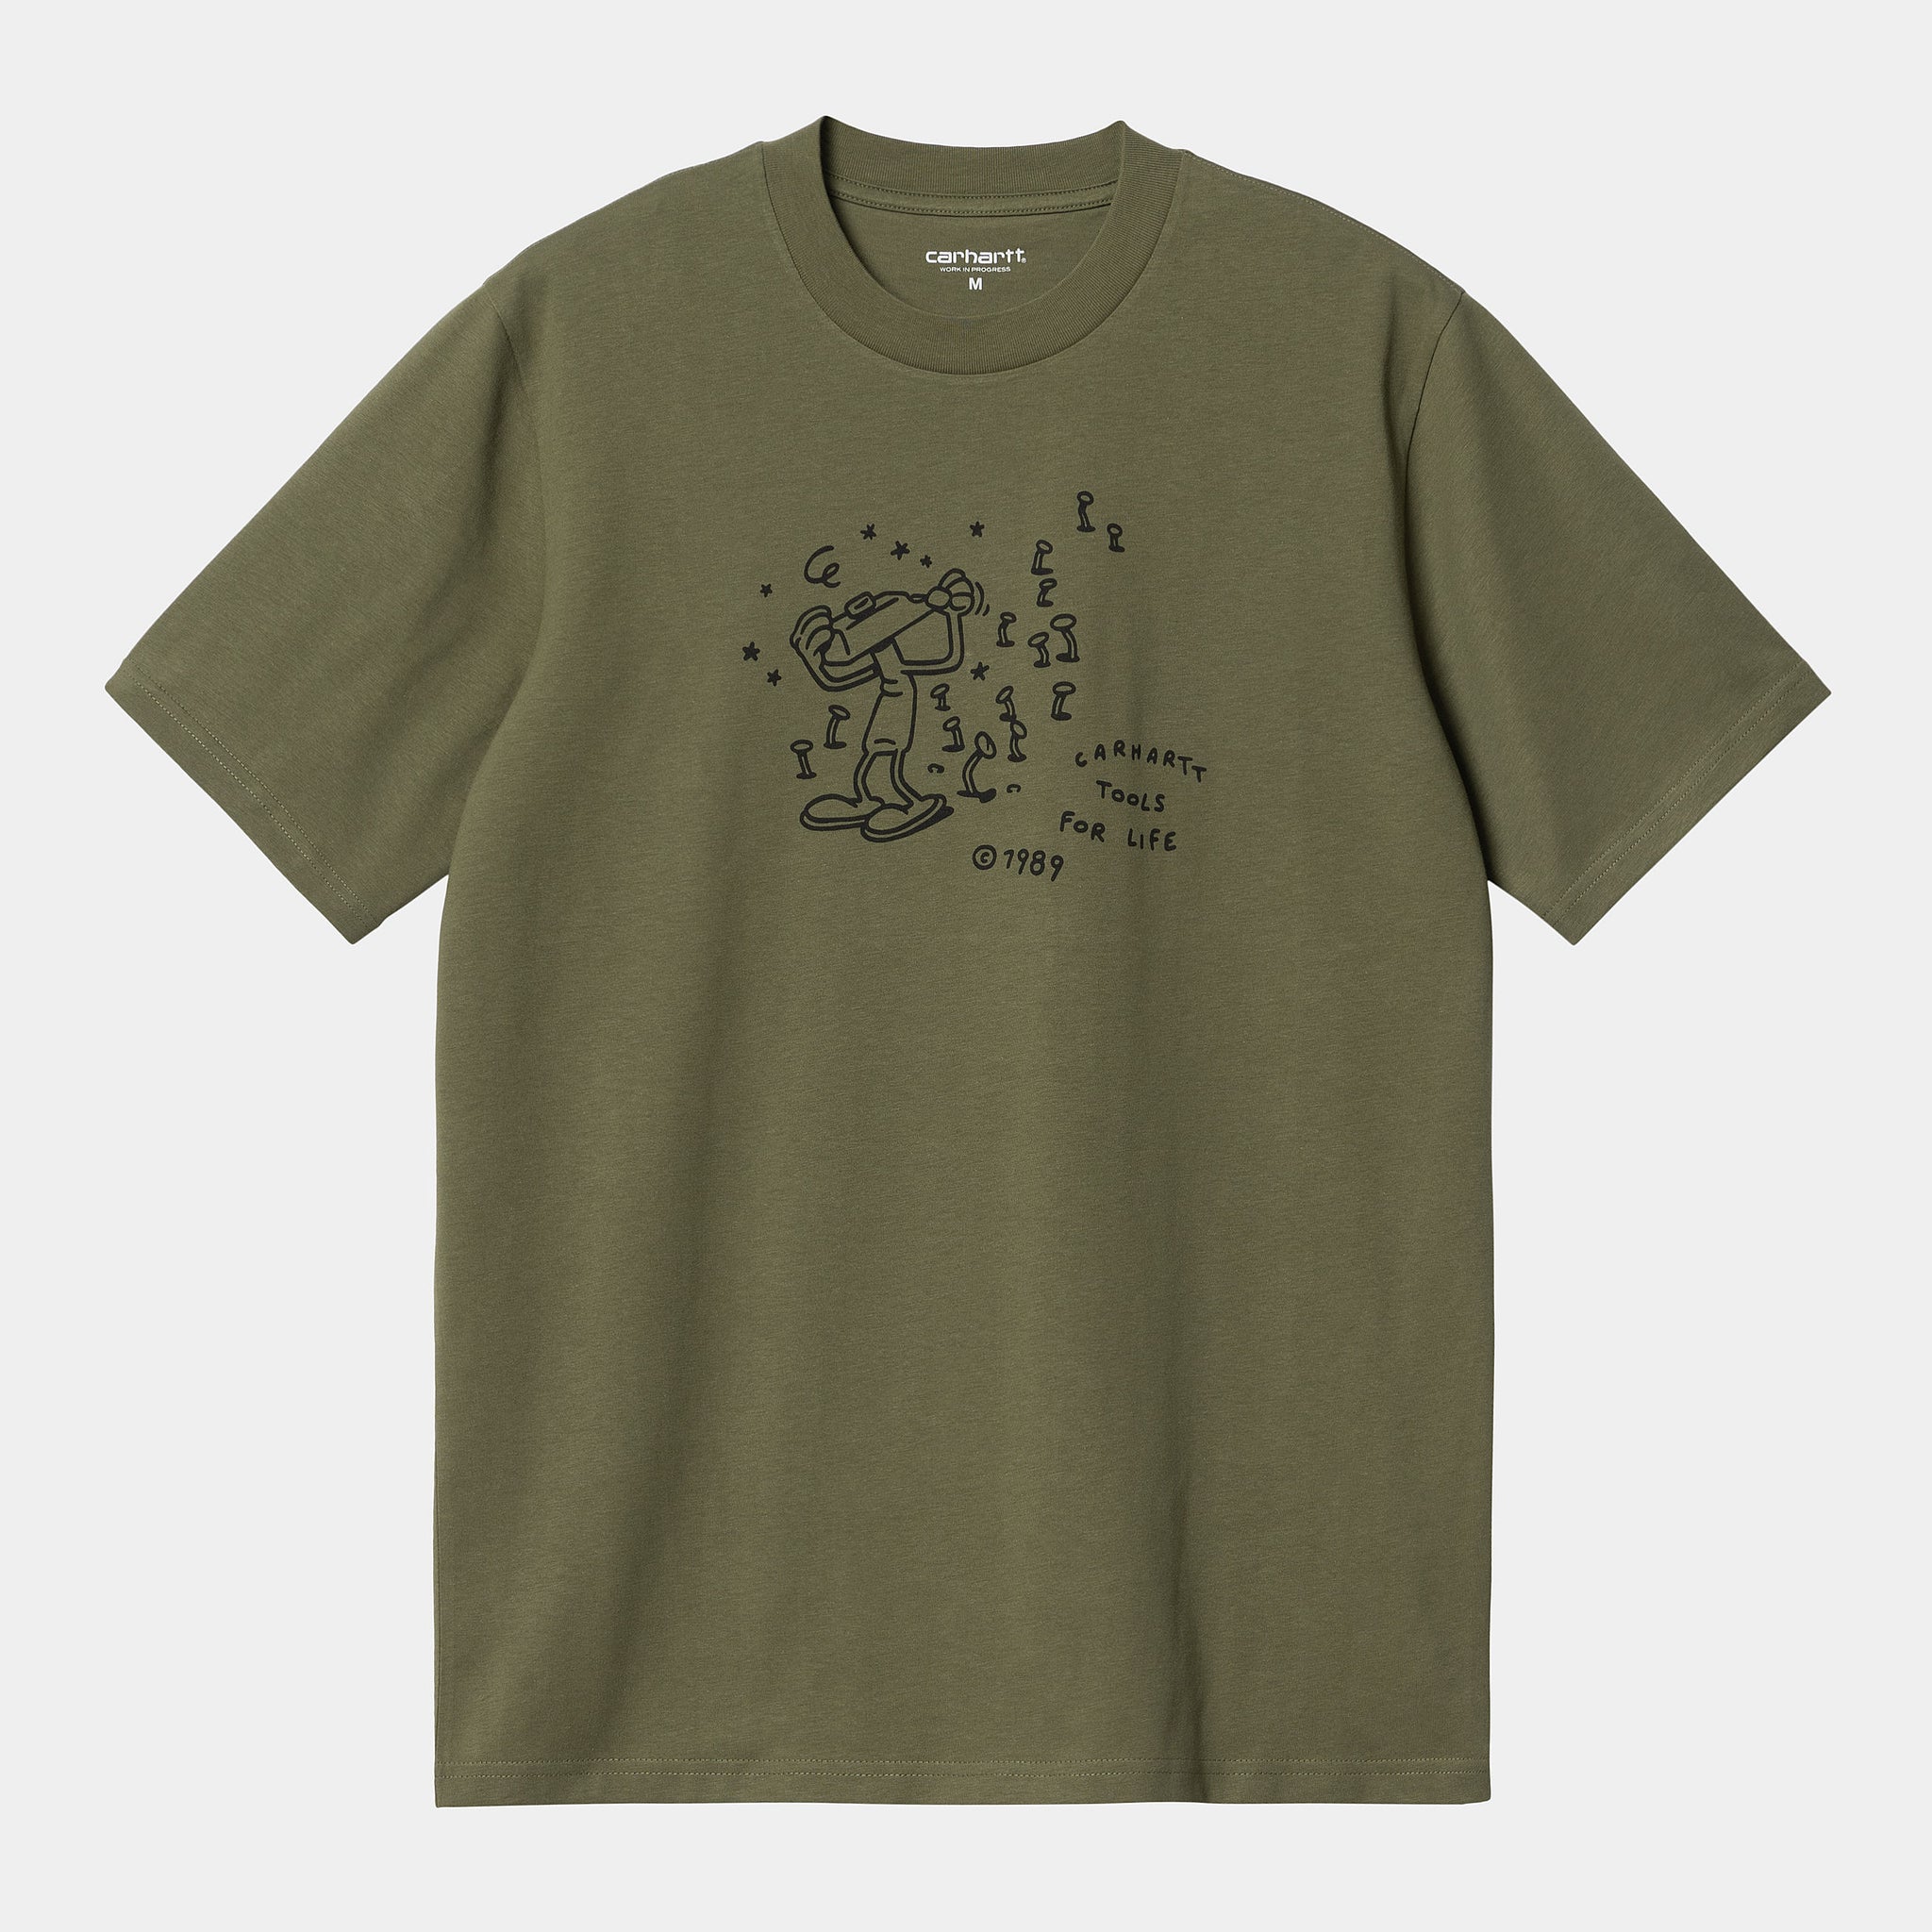 Carhartt WIP Tools For Life T-Shirt Dundee